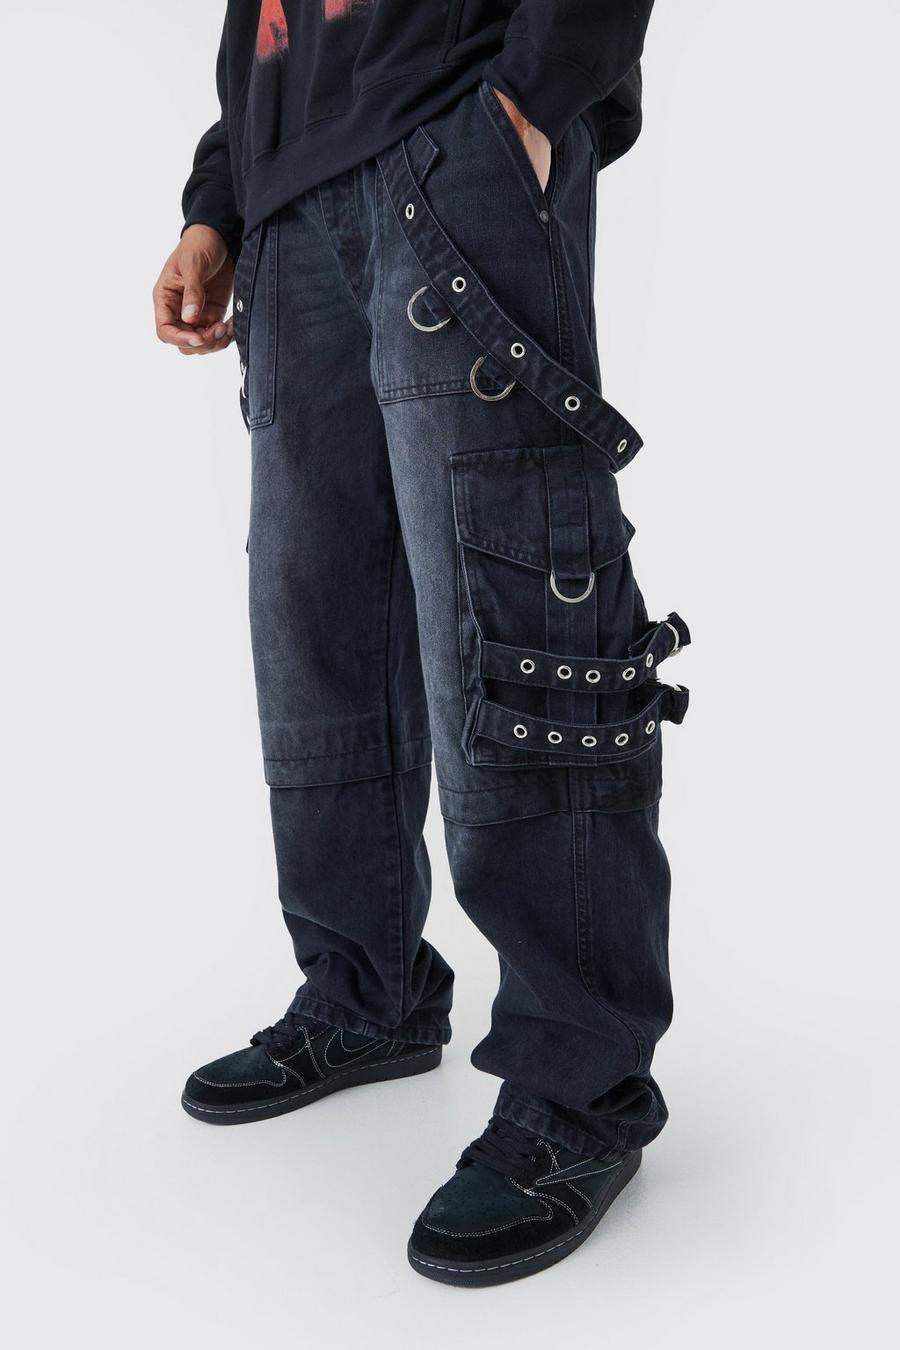 Black Strapped Pockets Cargo Jeans